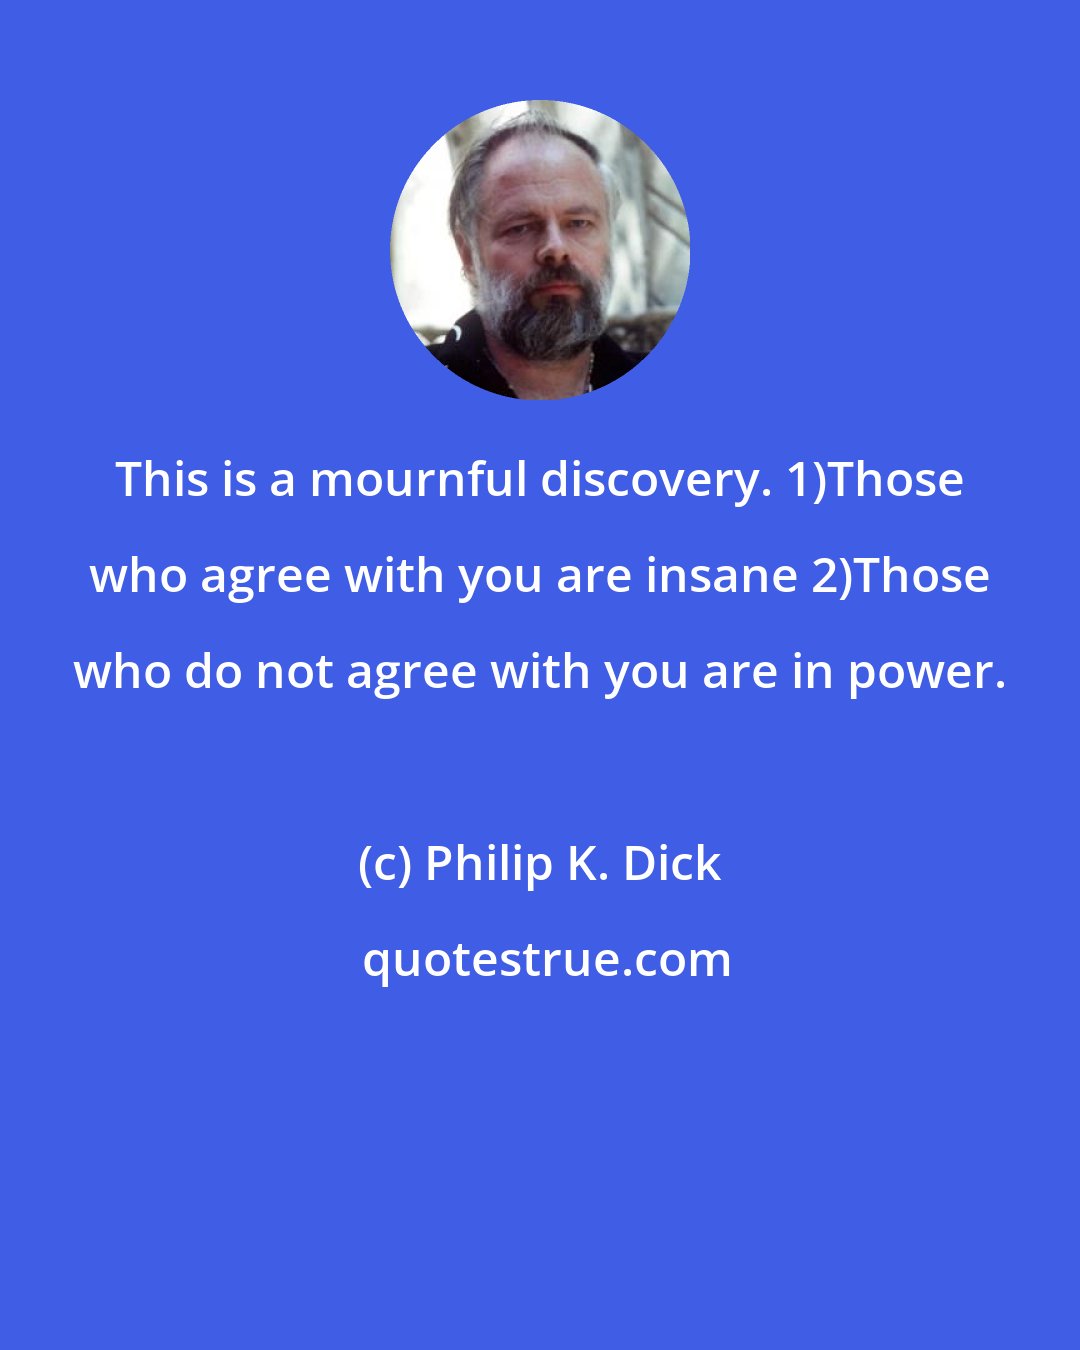 Philip K. Dick: This is a mournful discovery. 1)Those who agree with you are insane 2)Those who do not agree with you are in power.